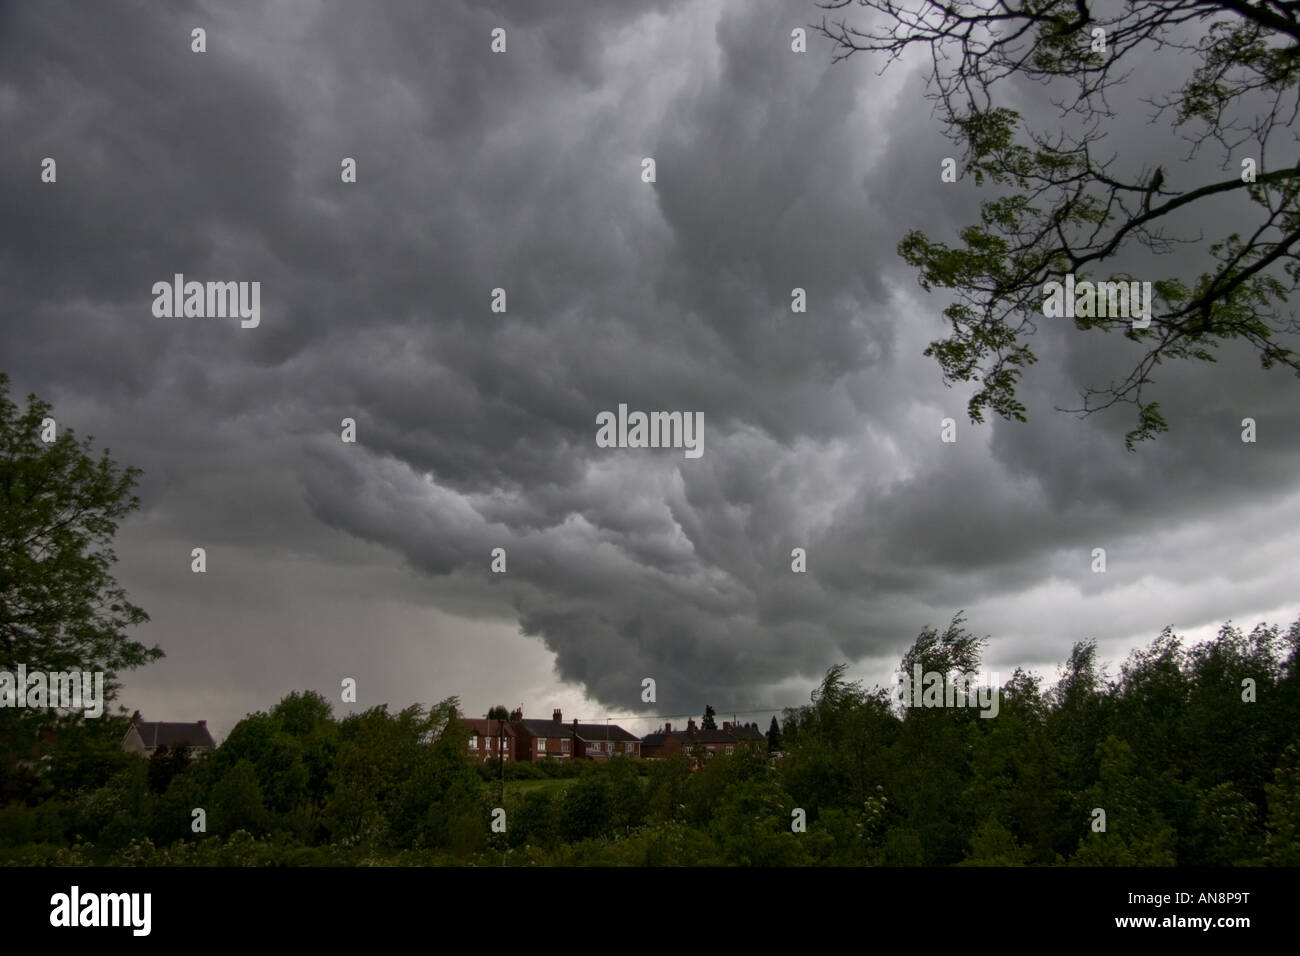 Gathering storm clouds over Staffordshire, England Stock Photo